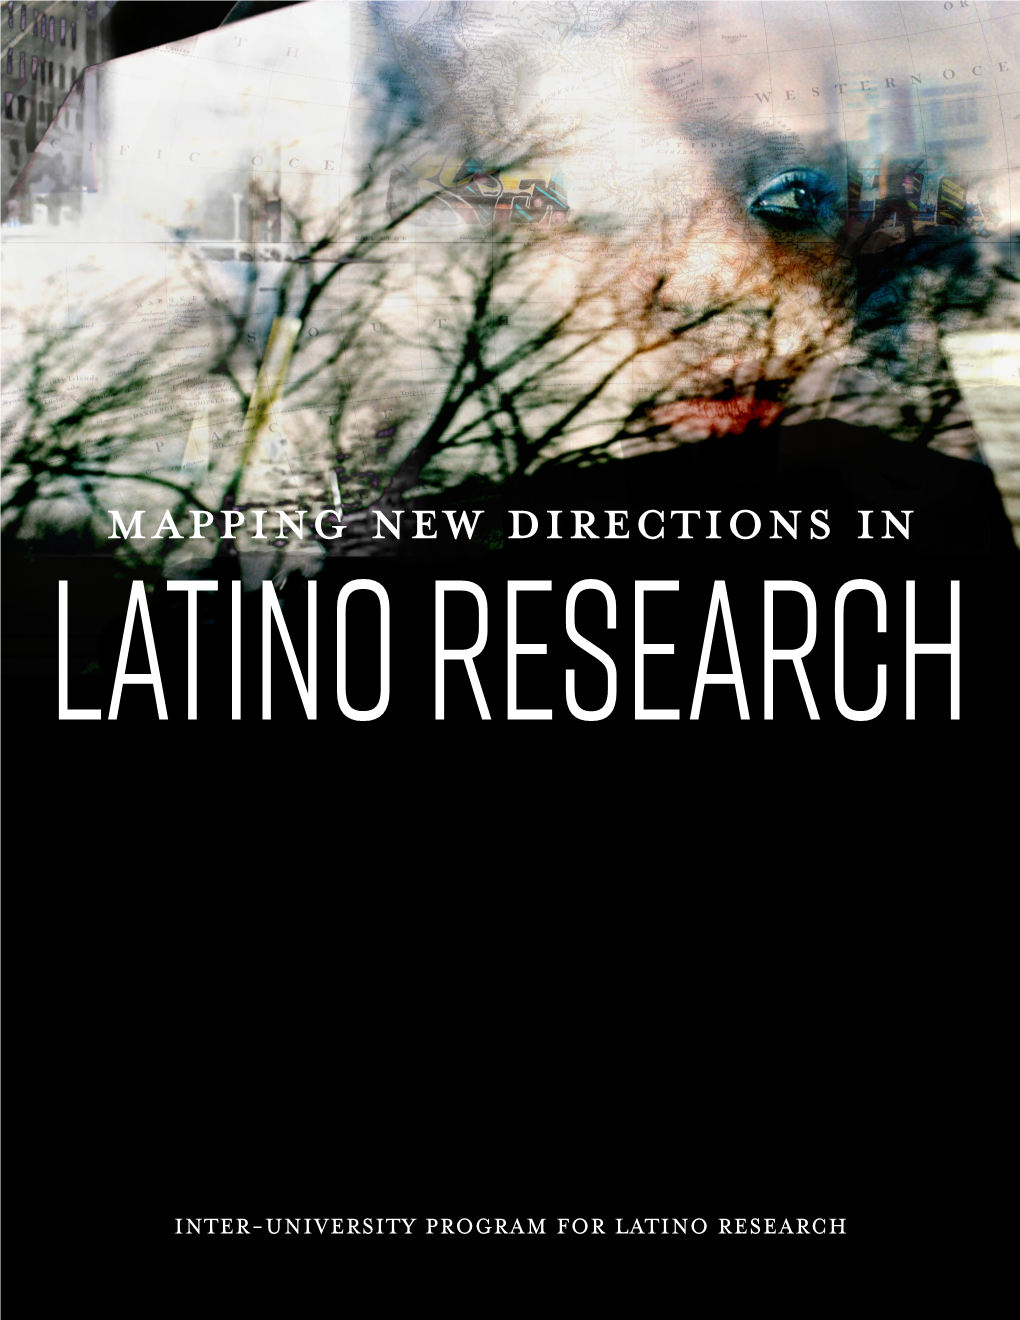 MAPPING NEW DIRECTIONS in Latino Research